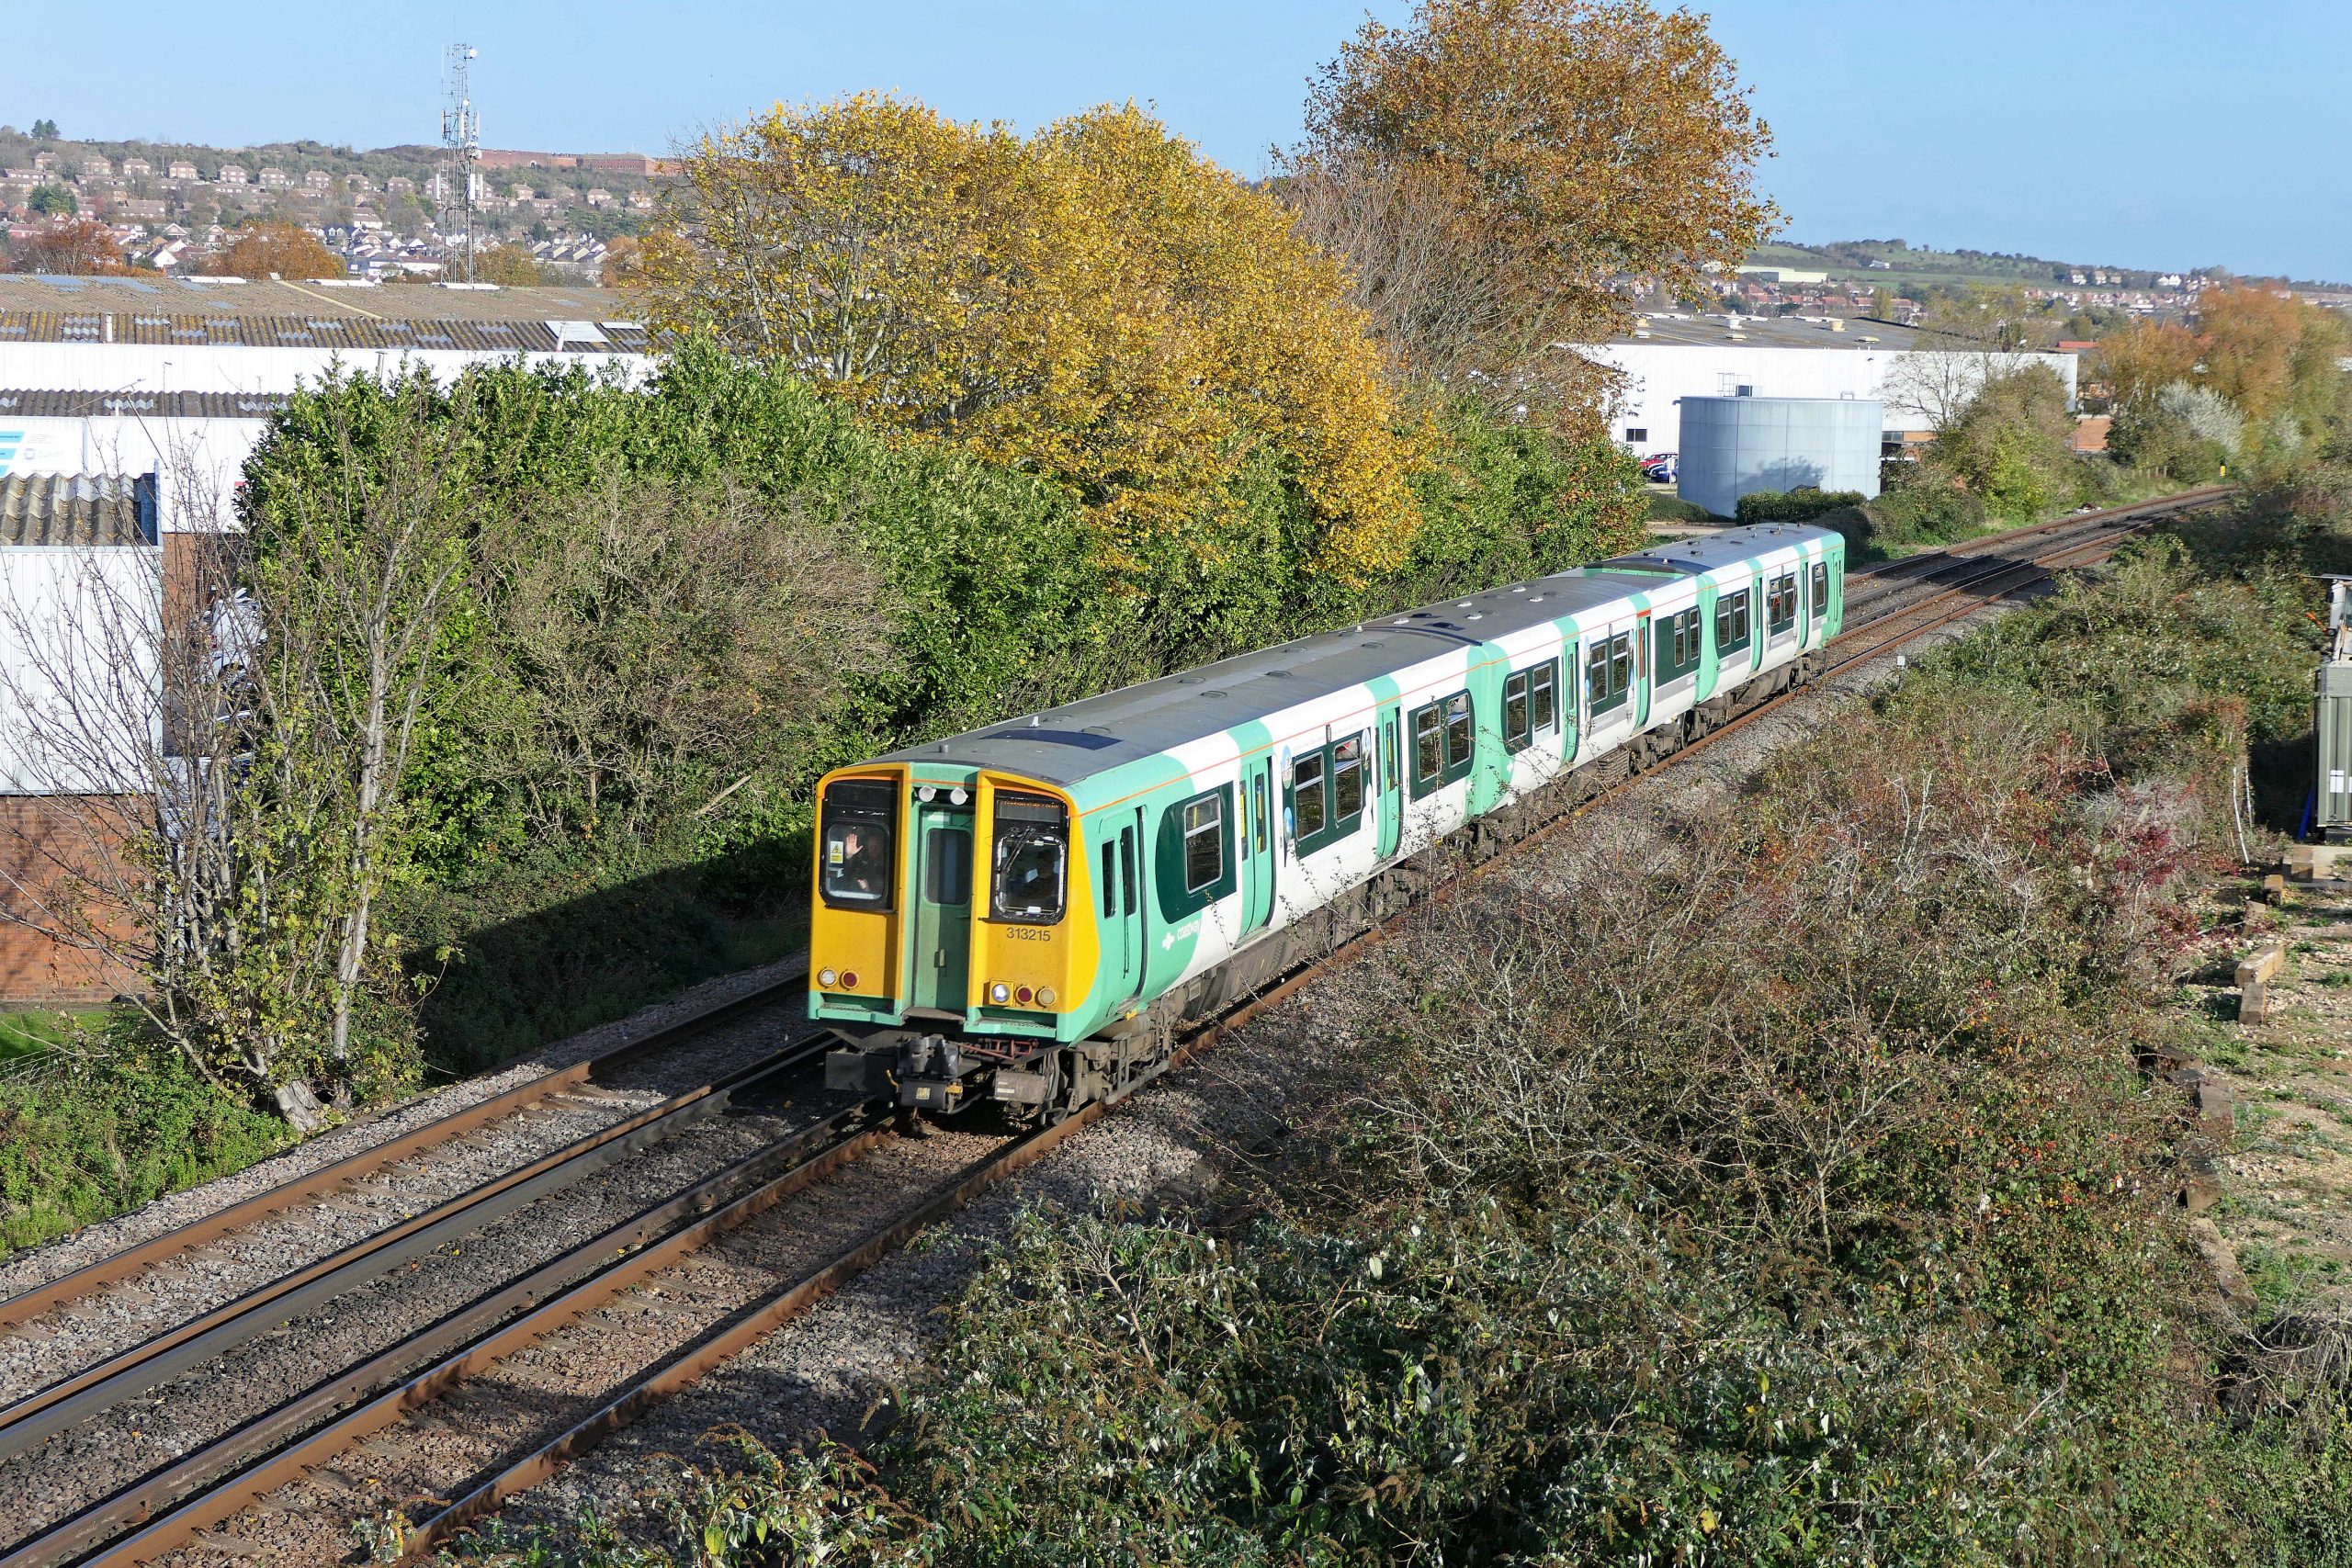 313 215 working a Brighton to Portsmouth service approaching Portcreek Junction. 17 November 2021.